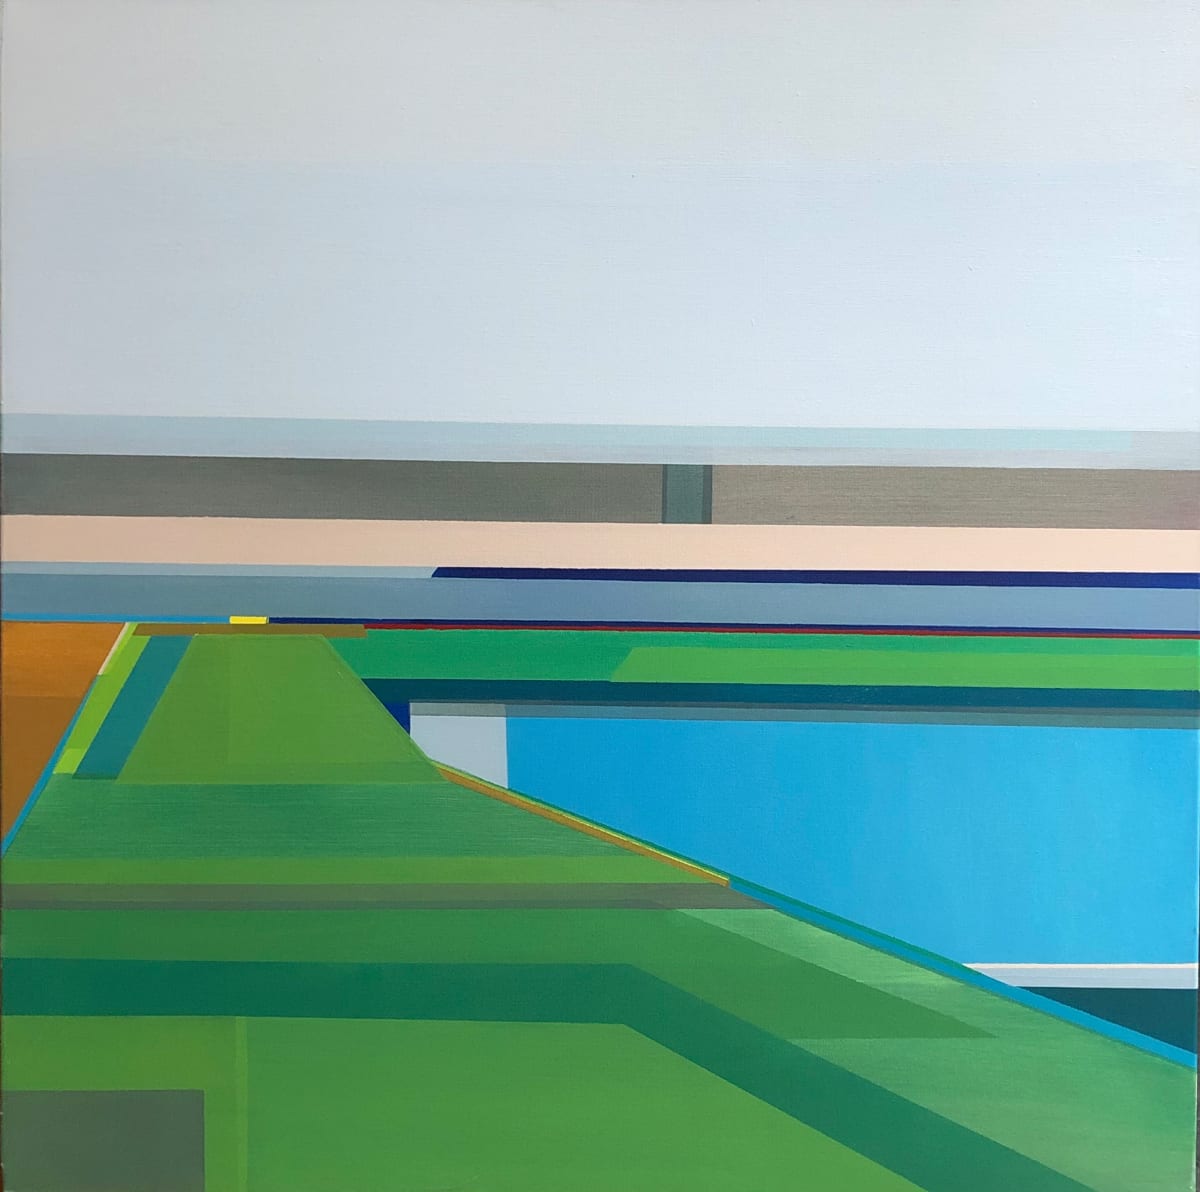 When the fog lifts by Shilo Ratner  Image: When the fog lifts, 30" x 30"